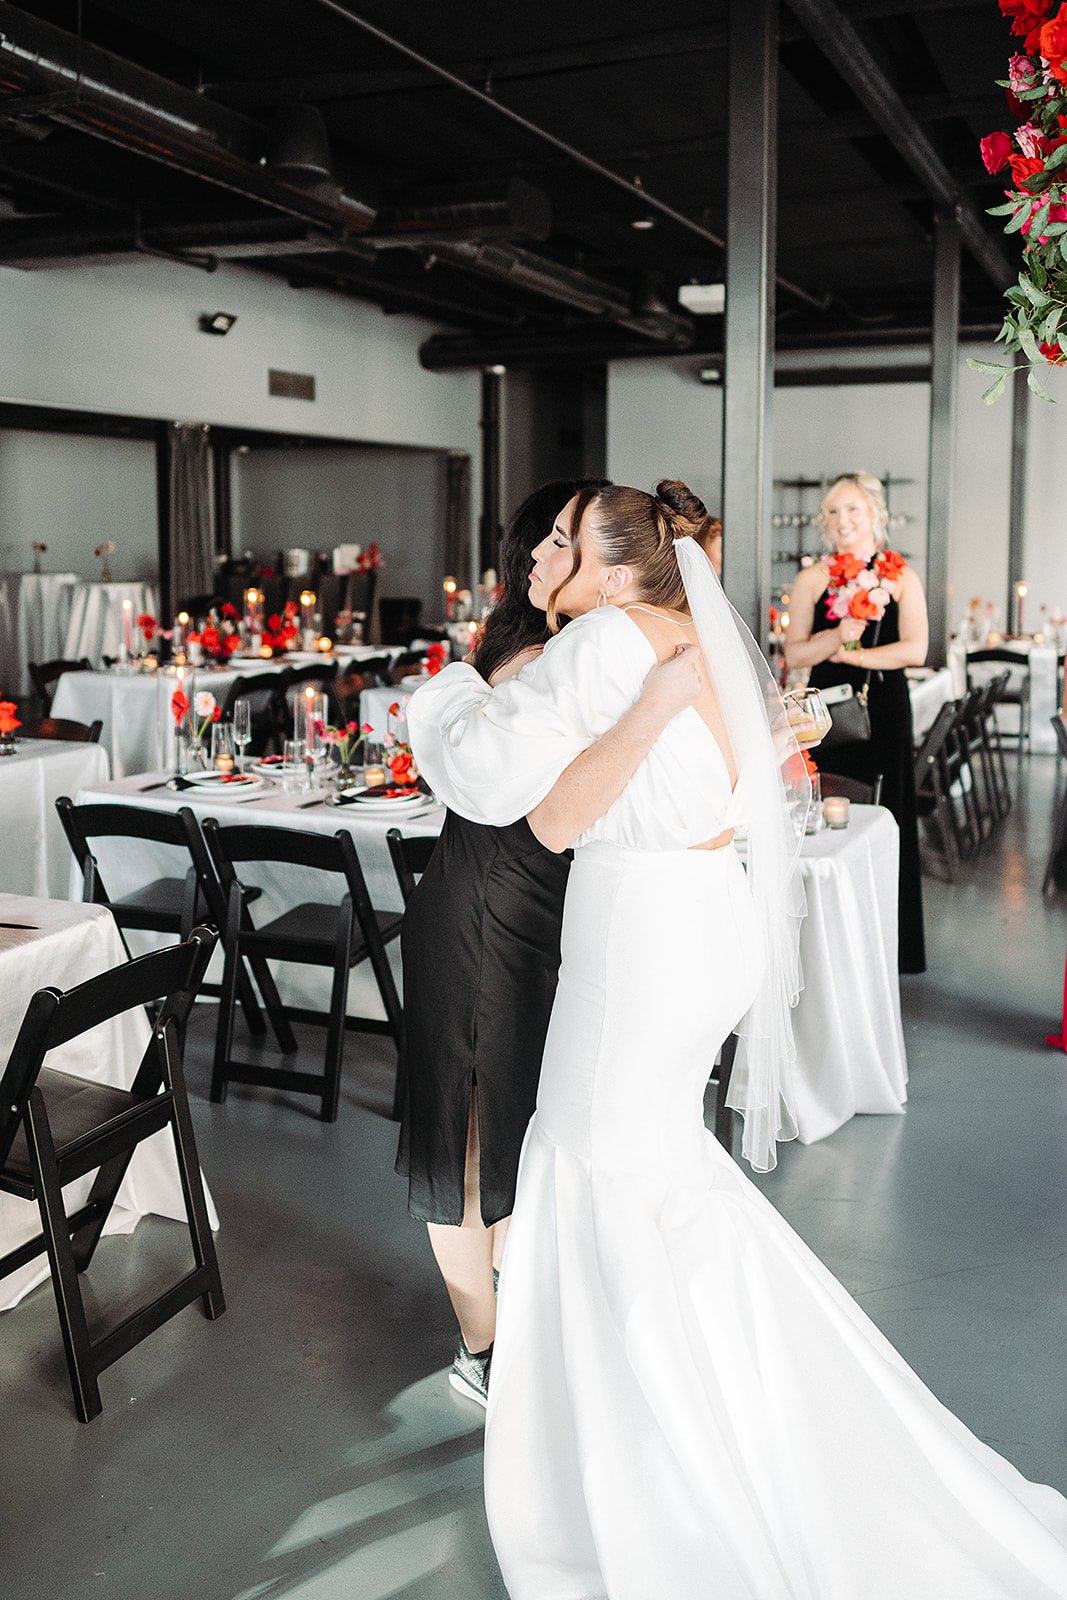 Bride hugs wedding planner, Bianca Nichole and Co after seeing her wedding design come to life